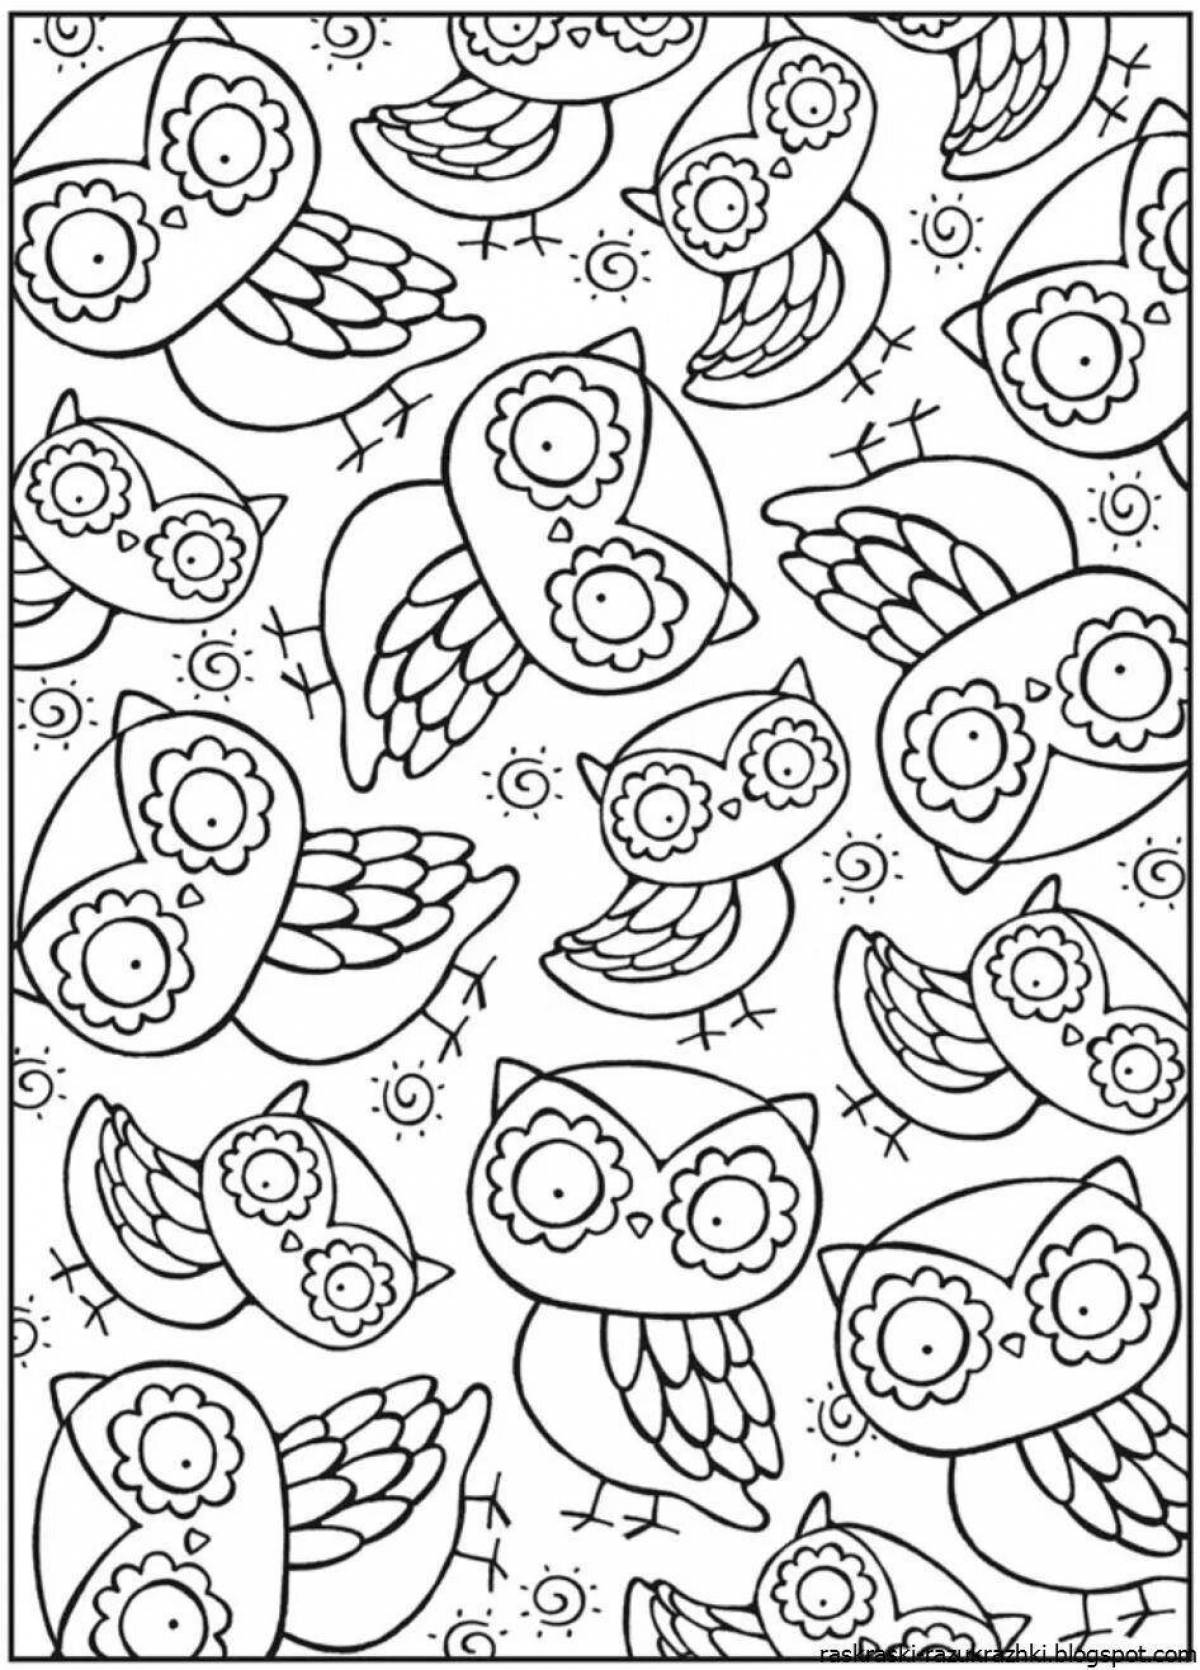 Fun coloring page small for children